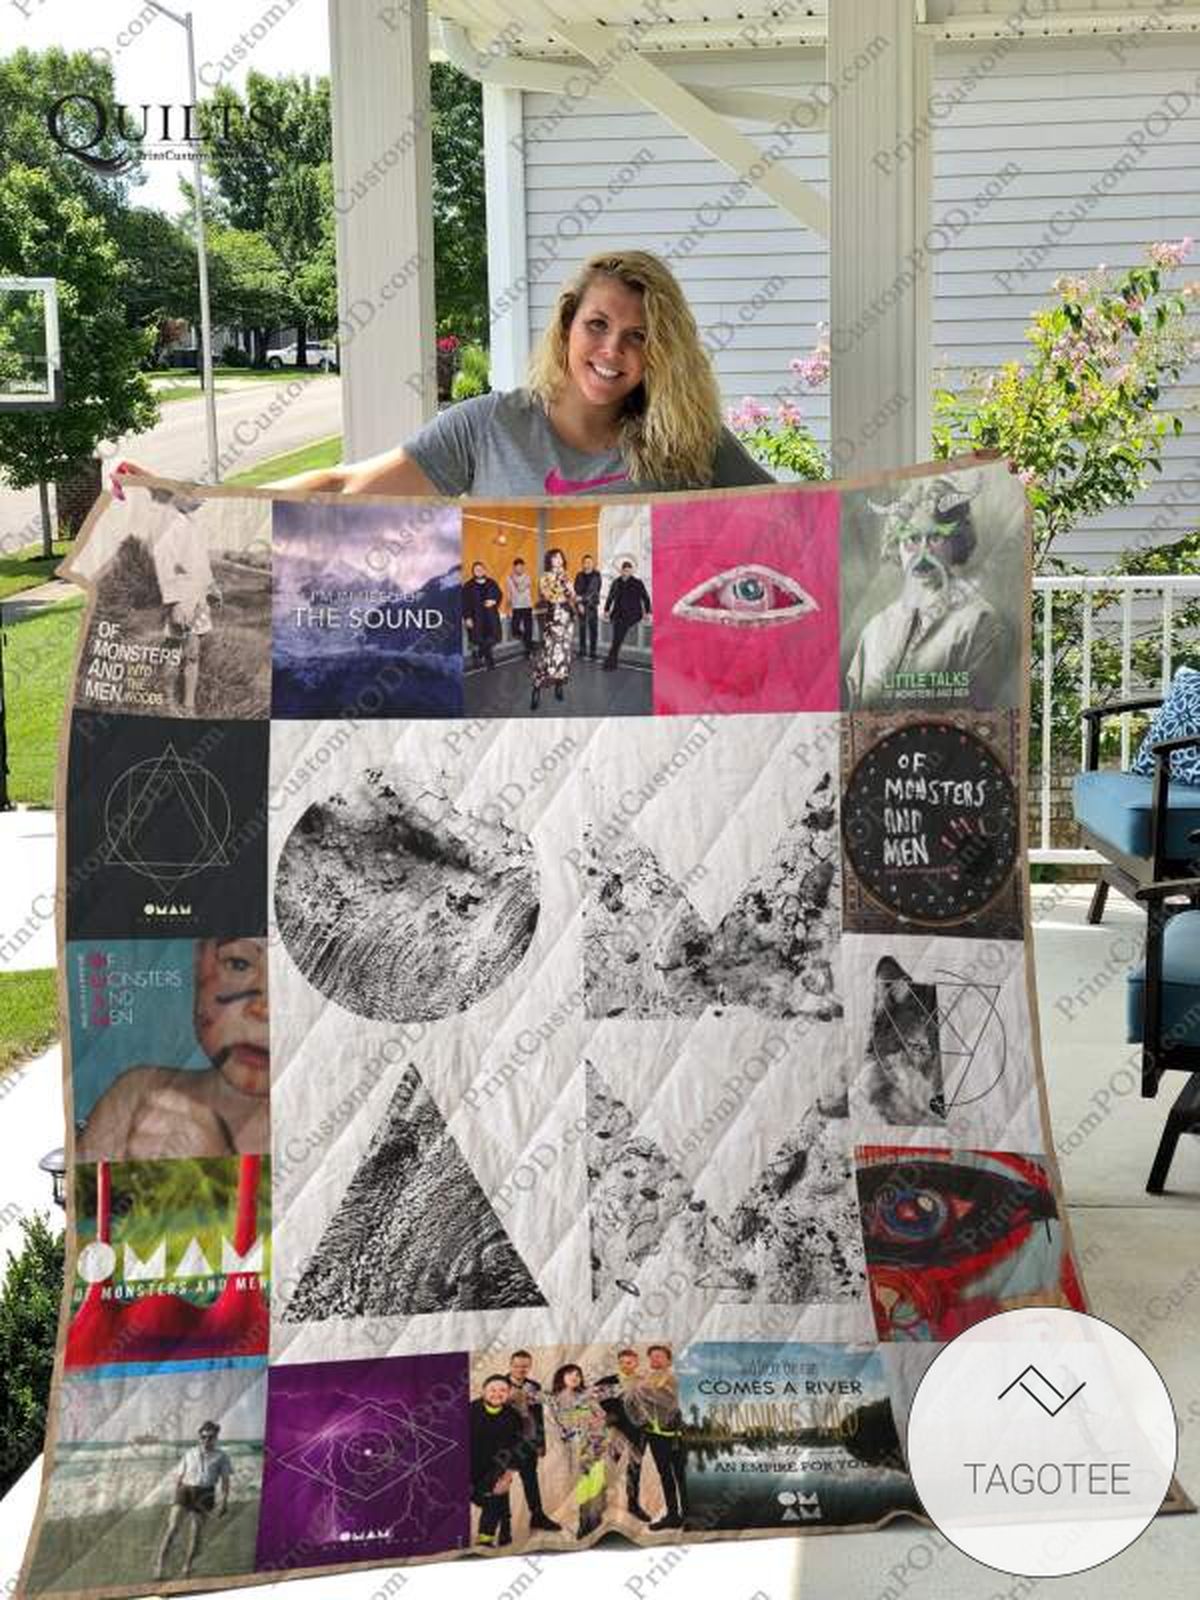 Top Rated Of Monsters And Men Albums Quilt Blanket